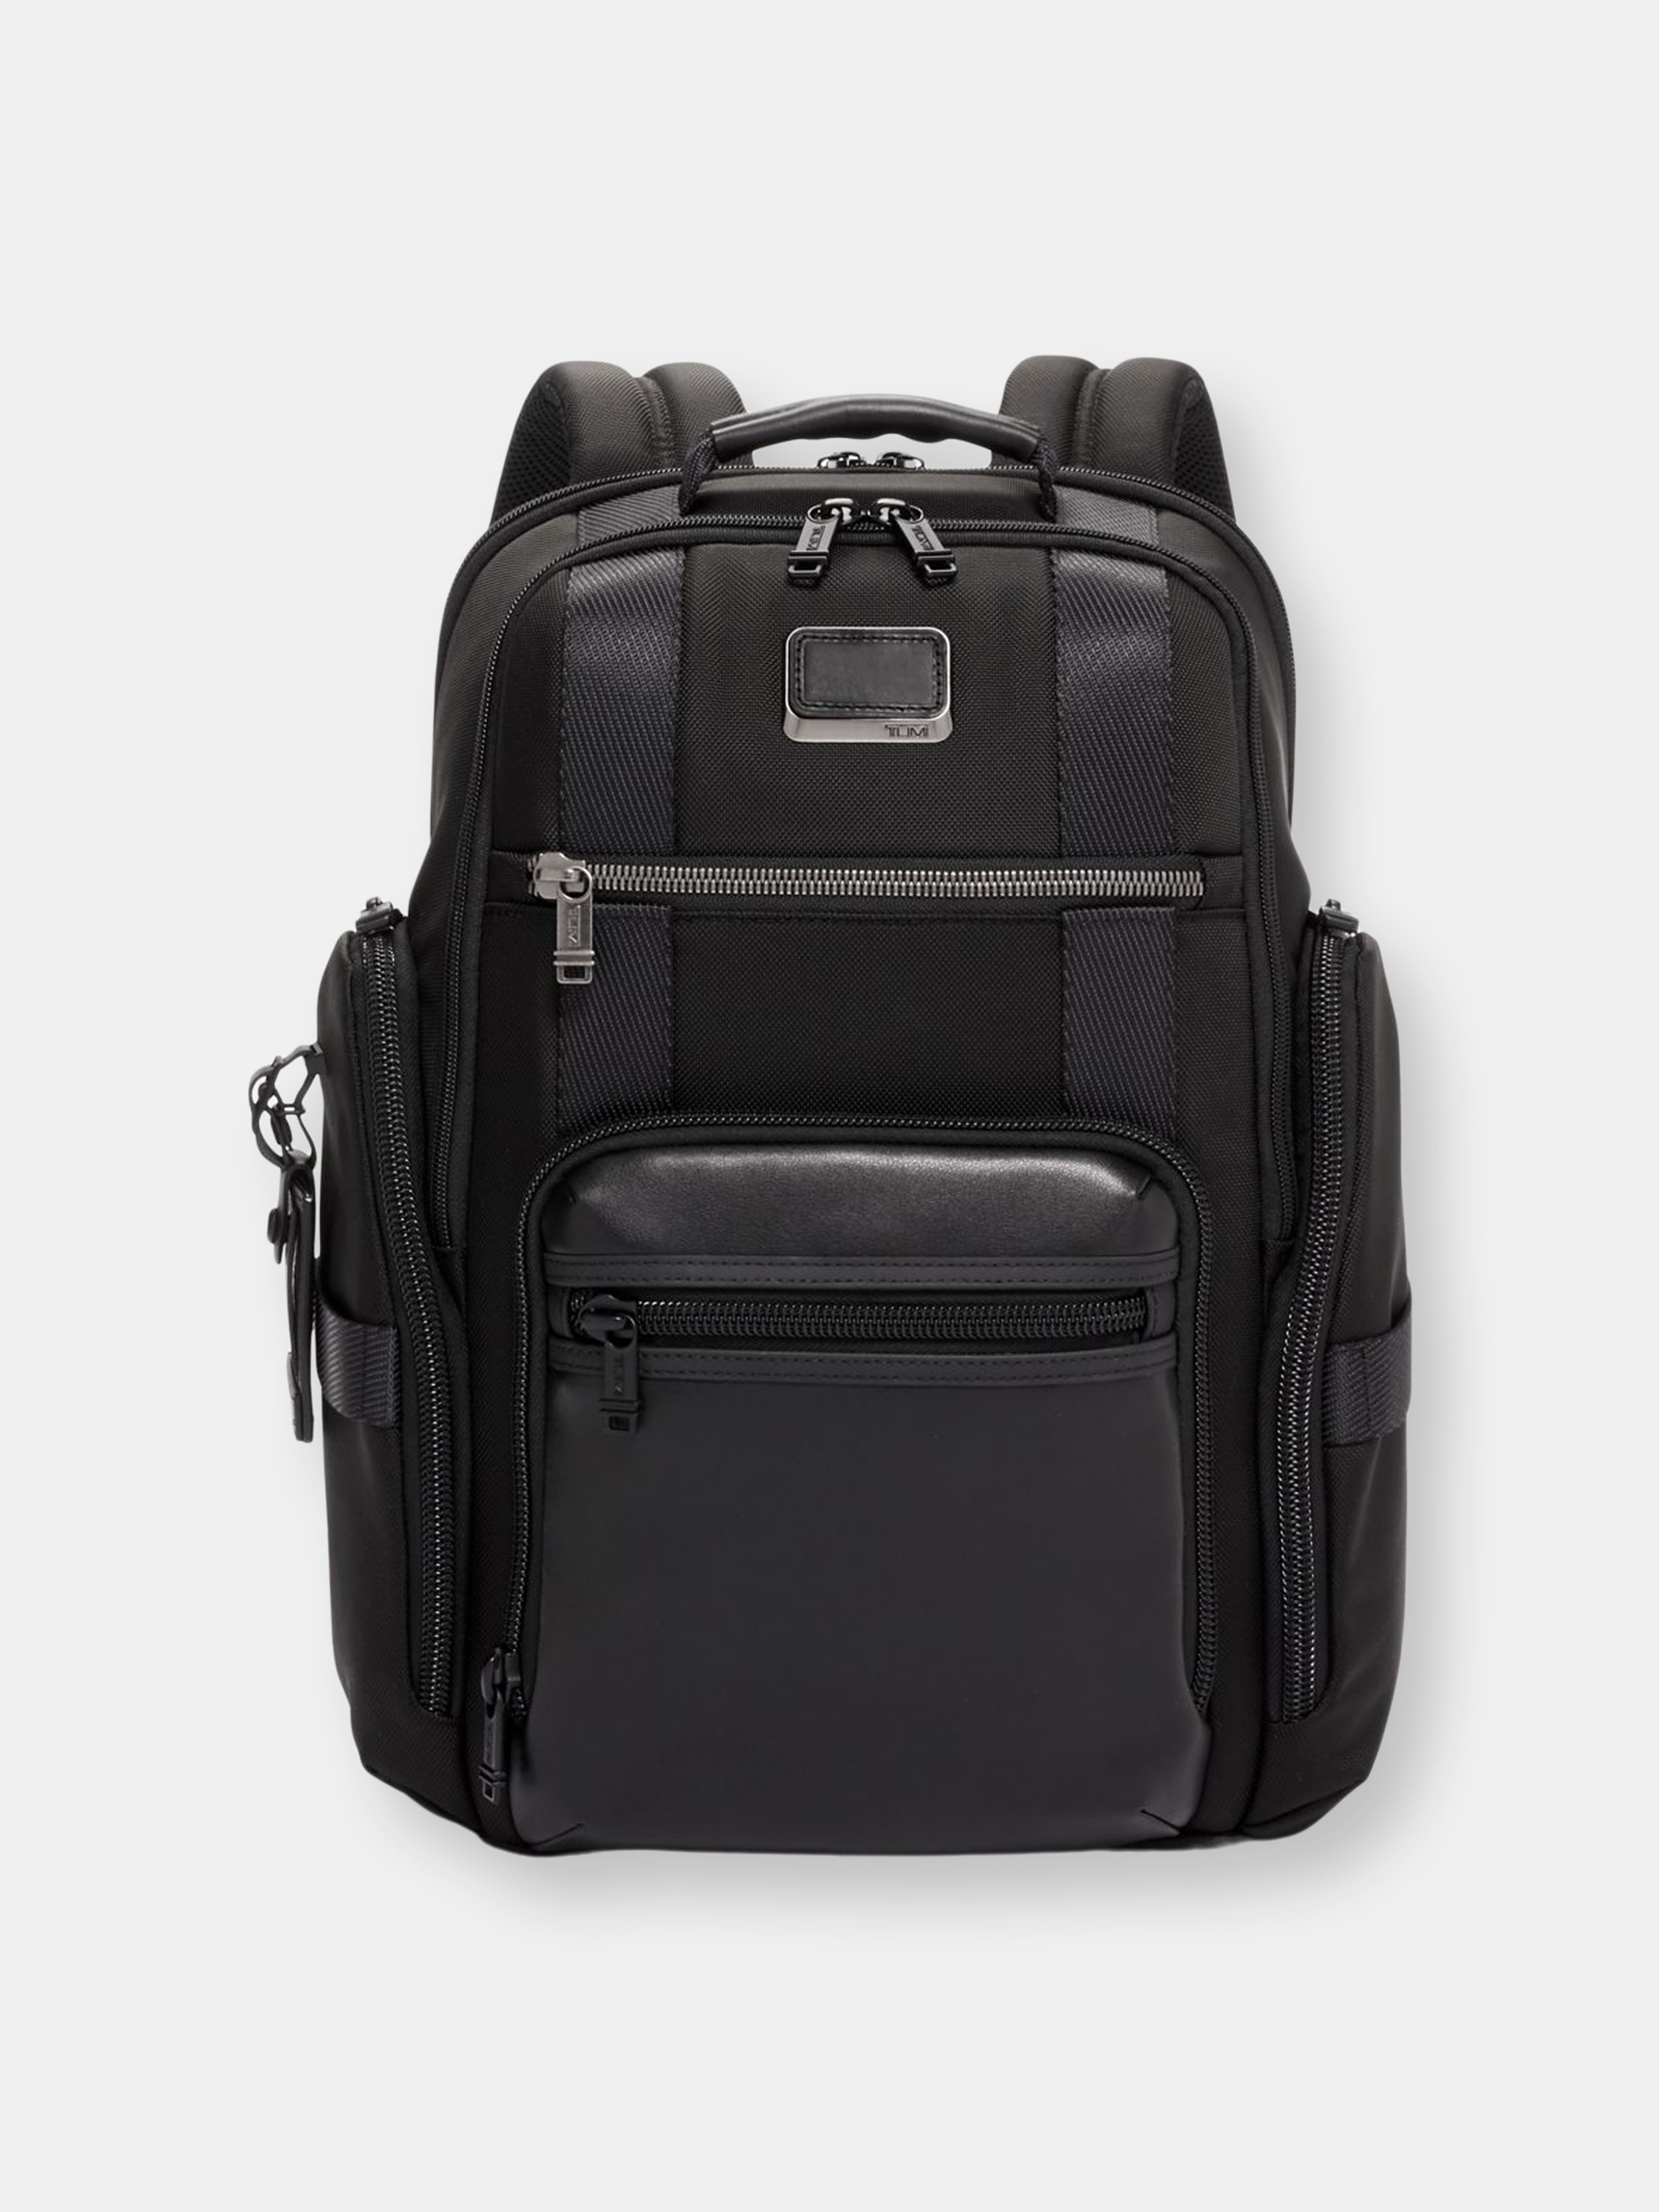 TUMI TUMI SHEPPARD DELUXE BACKPACK